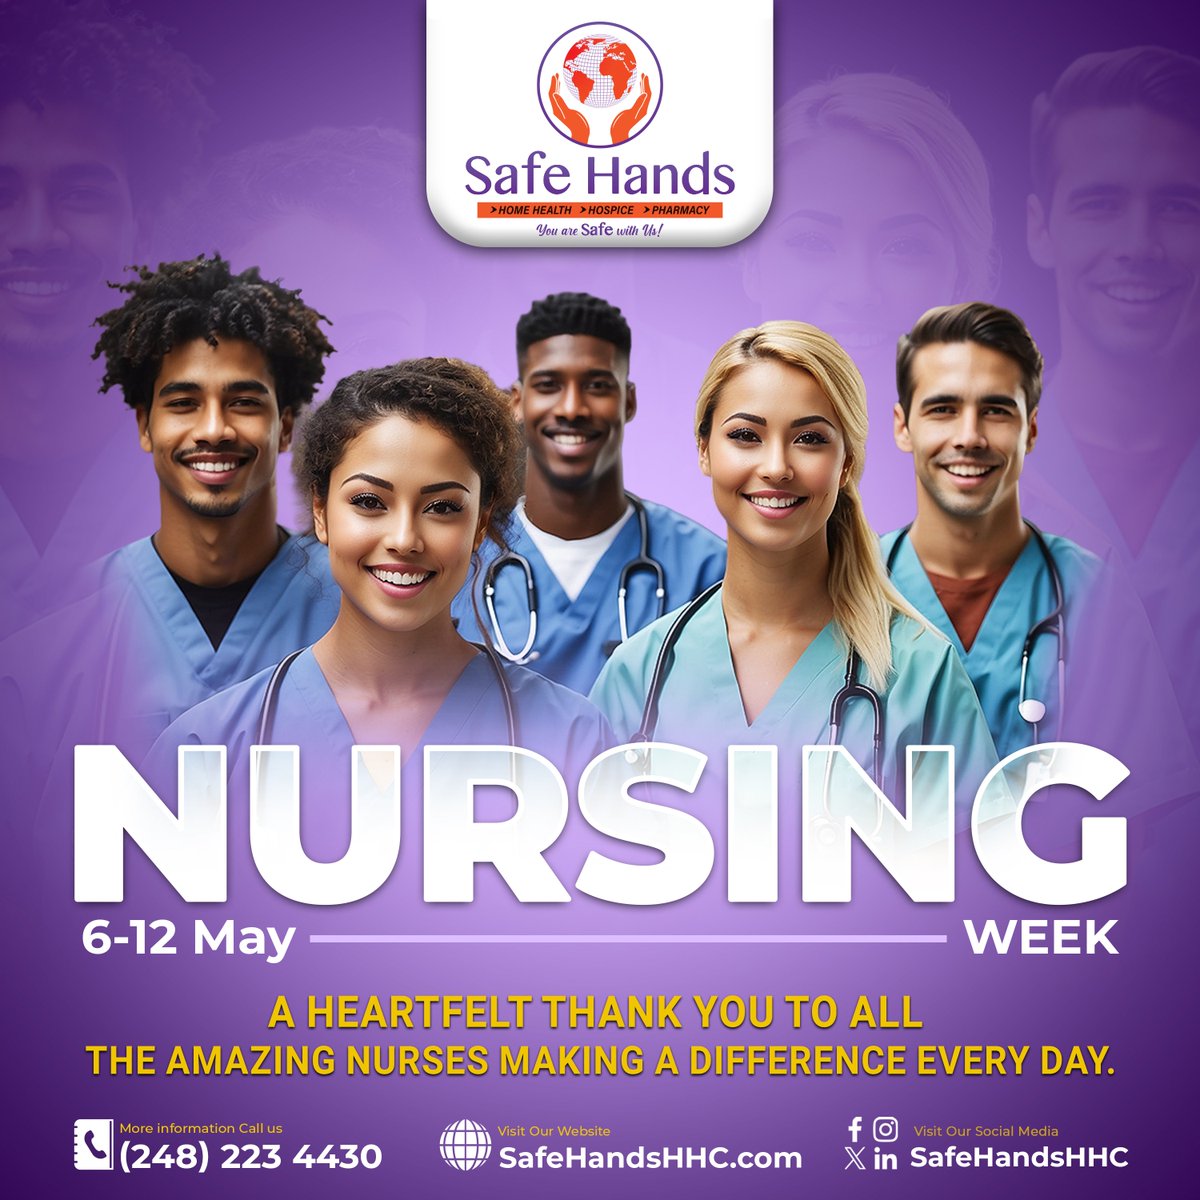 Join us in celebrating Nursing Week! 🎉 To all the dedicated nurses at Safe Hands and around the globe, your compassion and commitment make the world a healthier place. Thank you! 💜

#NursingWeek #SafeHandsHHC #ThankANurse #SafeHandsNurses #nurselife #NursingWeek2024 #SafeHands